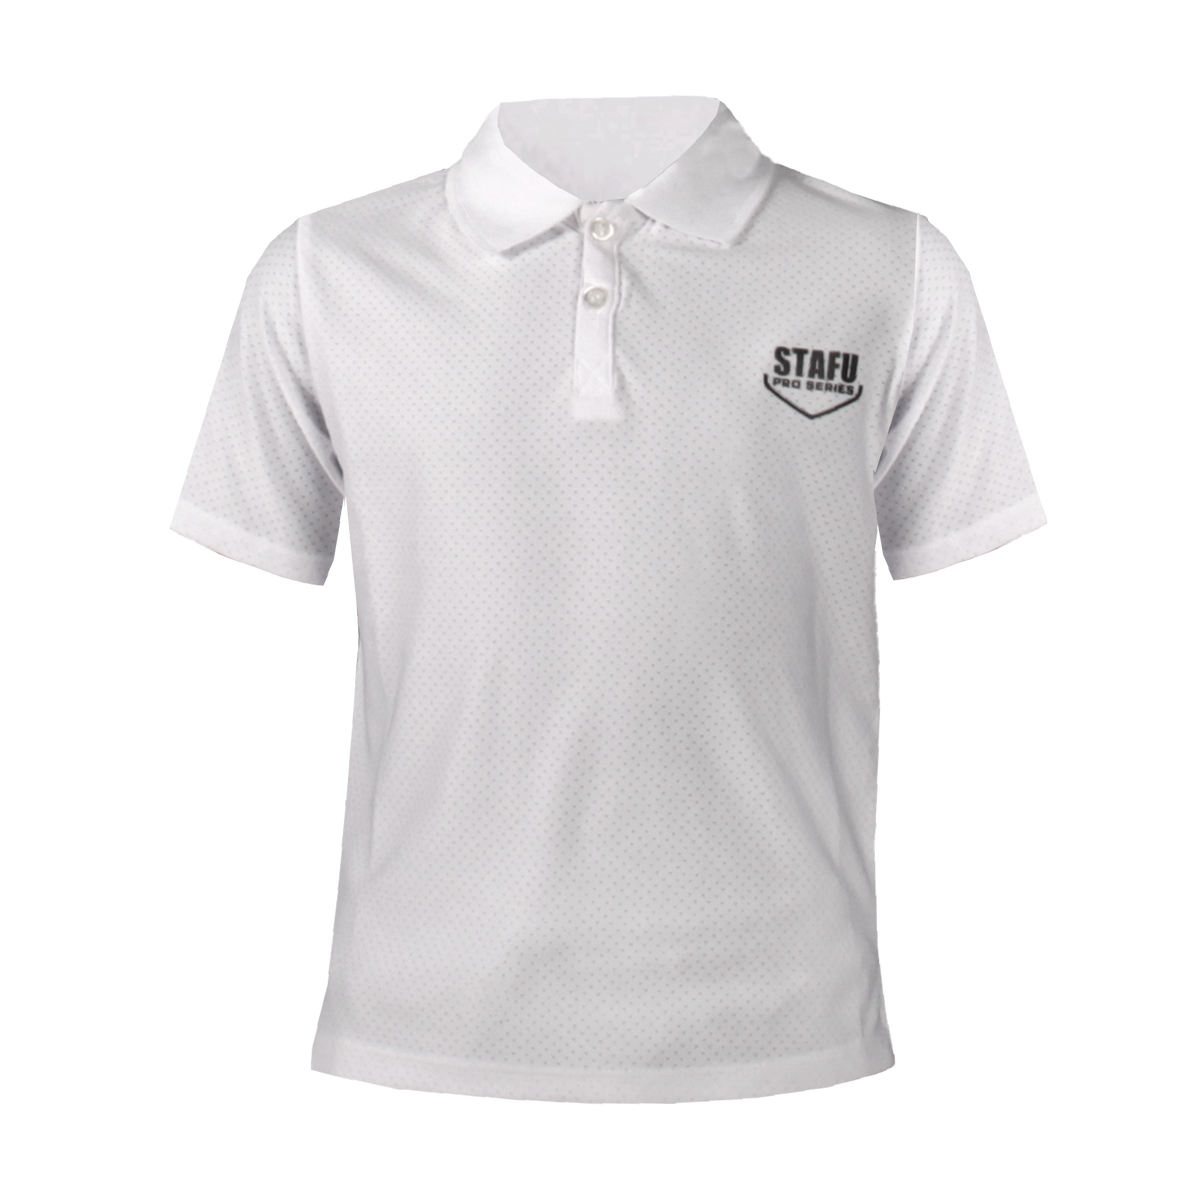 League Air Junior Perforated Short Sleeve Fisherman Sailor White UV Protected Polo Shirt